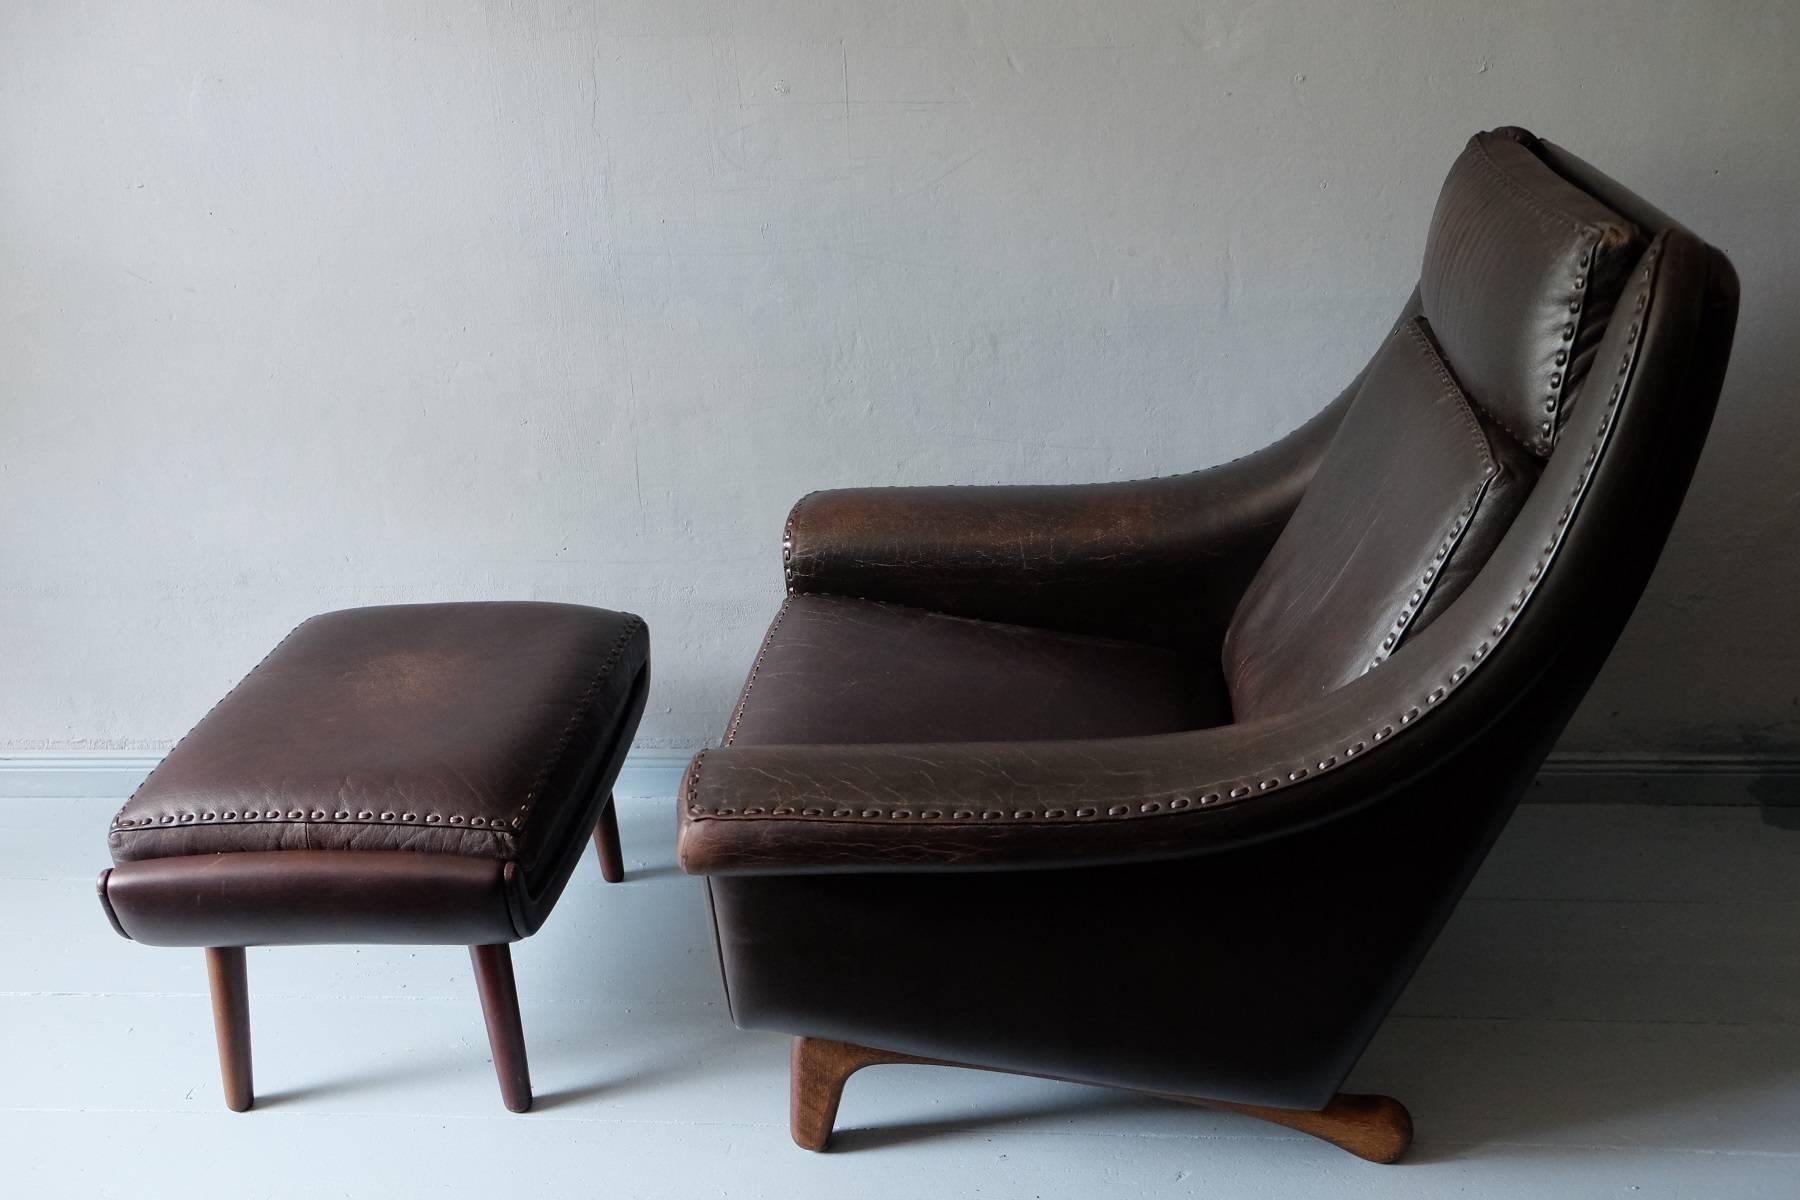 'Matador' lounge chair in leather with footrest, designed by Aage Christiansen for Erhardsen & Andersen.
Original and unusual design of the base.
Very comfortable lounge chair.
   